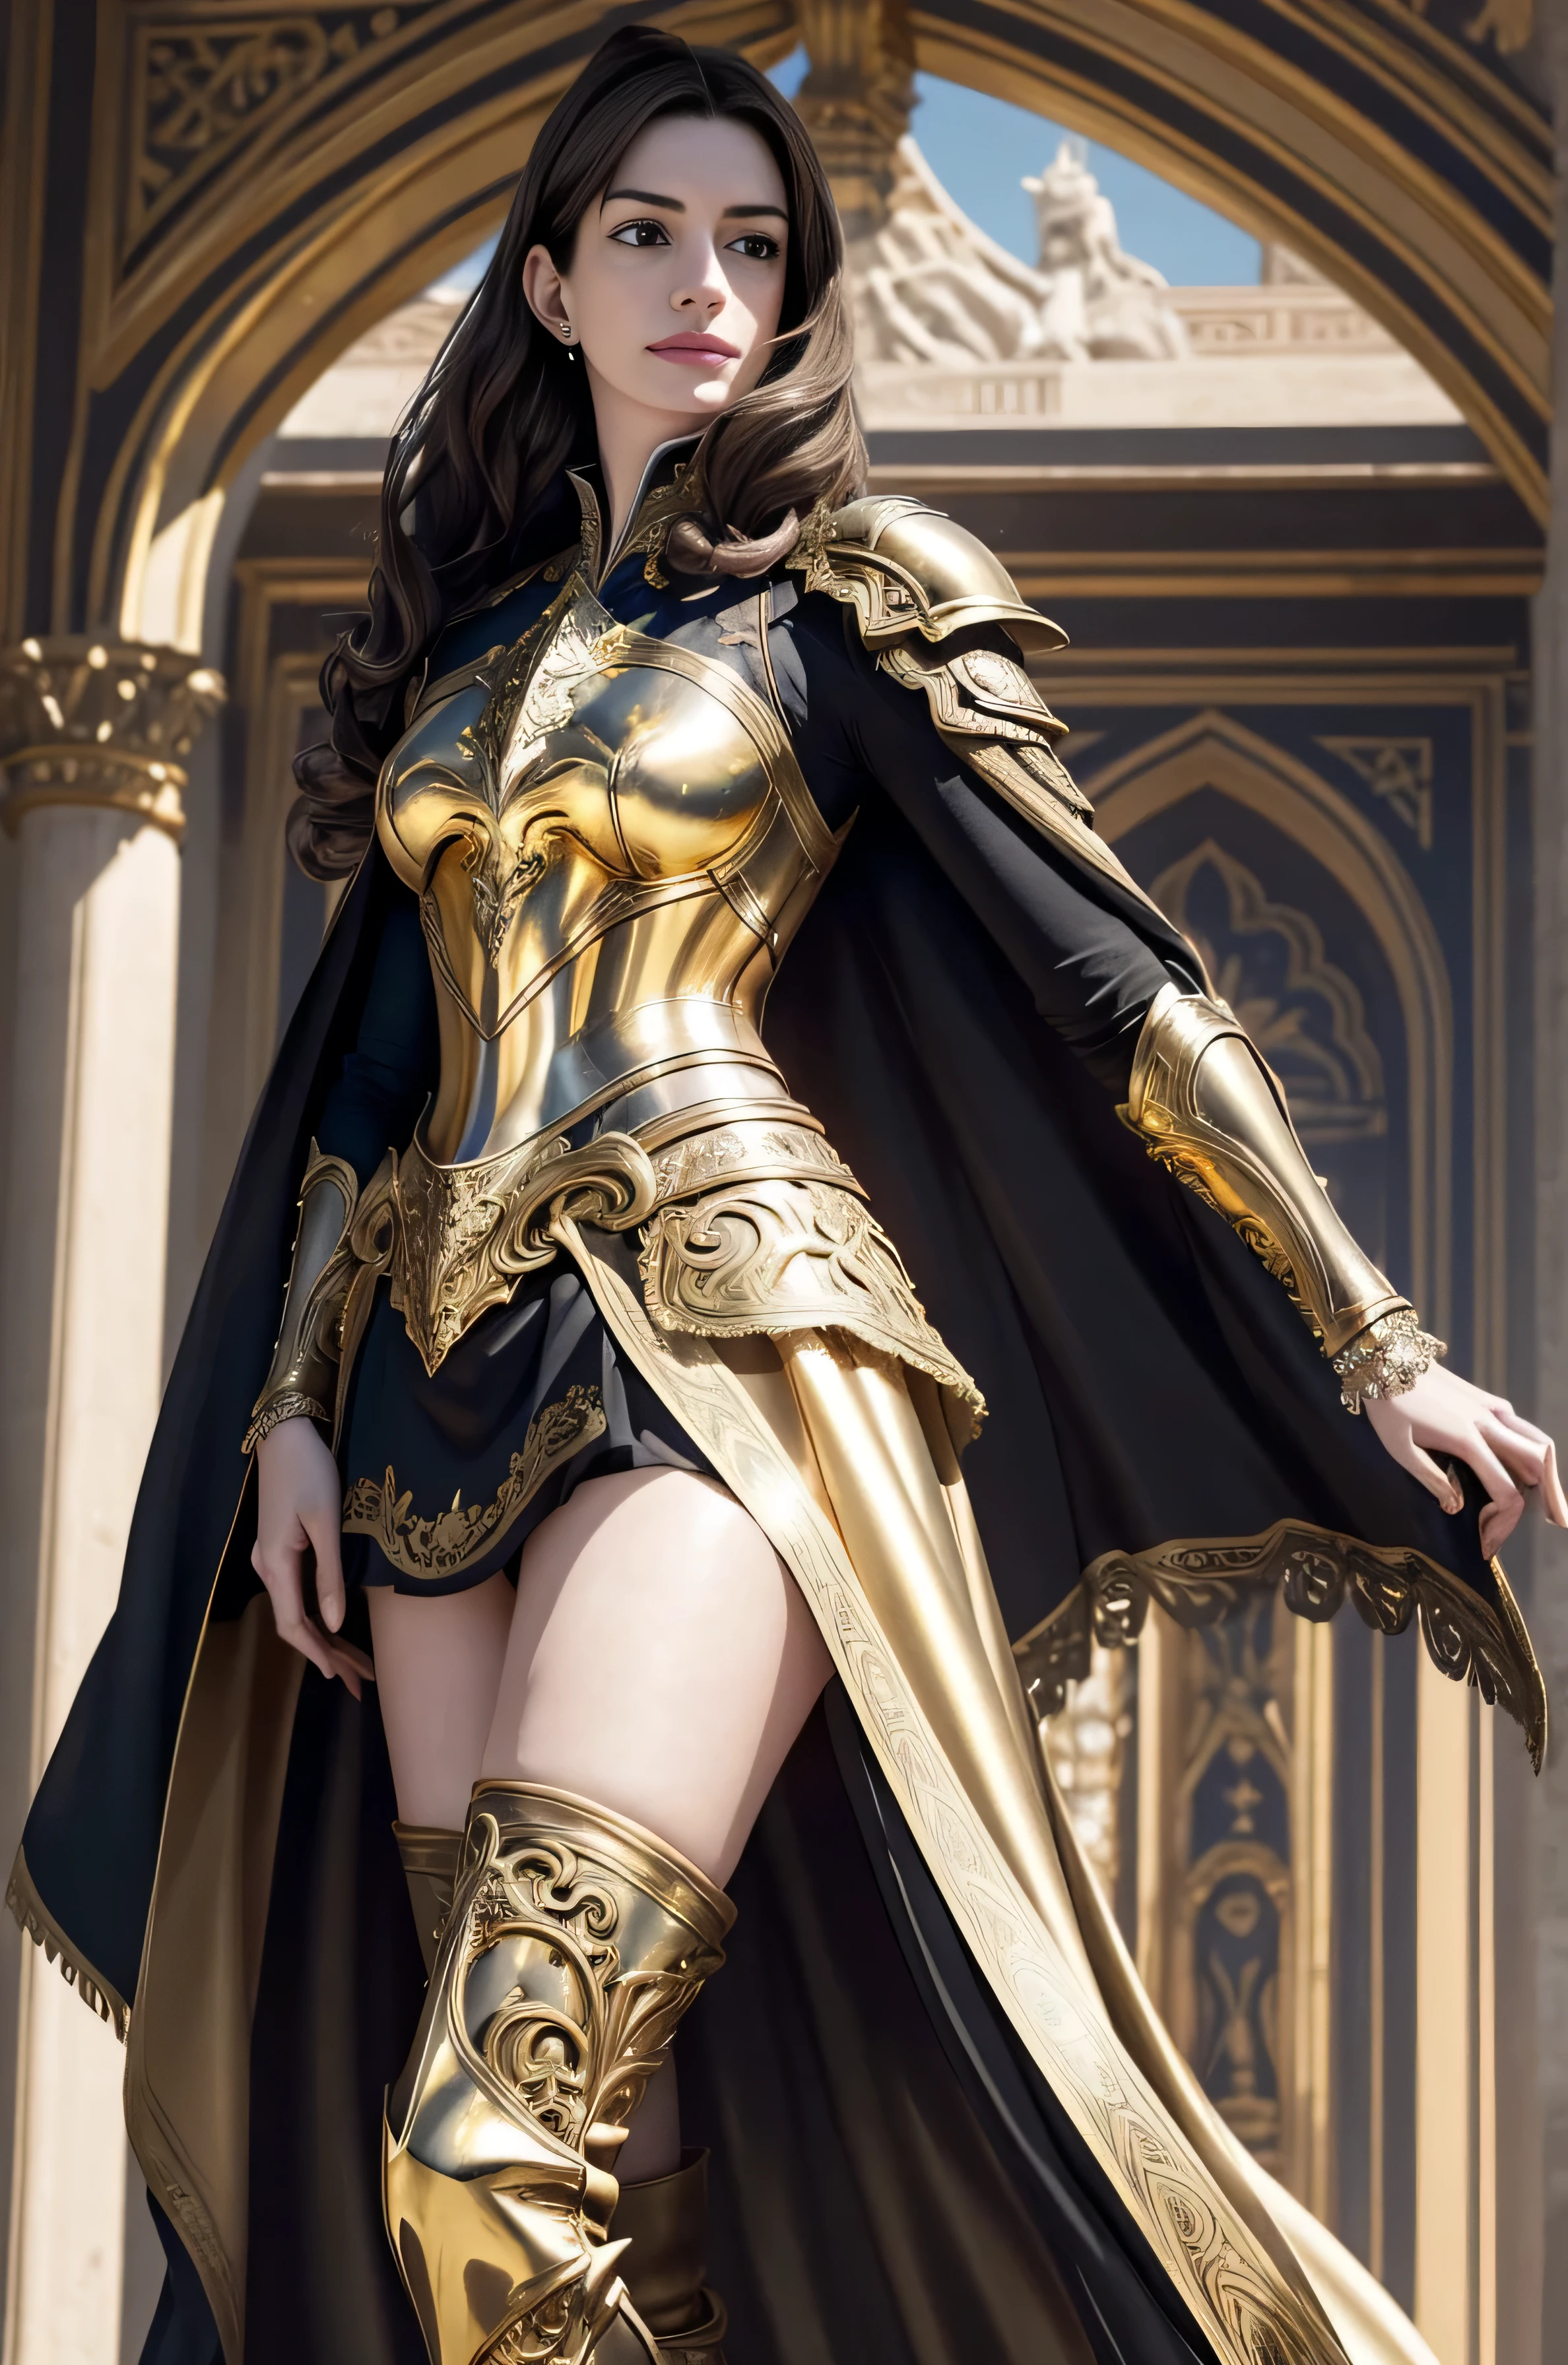 ((Anne Hathaway in ornate gold plate armor)), award winning concept art of tall (1girl) in ornate plate armor, royal, elegant, ((facing camera)), look at camera, eye contact, high long ponytail, dramatic long flowing hair, model on runway, epic, god rays, centered, (masterpiece:1.2), (best quality:1.2), Amazing, highly detailed, beautiful, finely detail, warm soft color grading, Depth of field, extremely detailed 8k, fine art, stunning, iridescent, shiny, light reflections, crisp, curls, wind, outdoor palace, elegant pose, hyper realism, vibrant, sunlit, edge detection, (miniskirt pelvic cover), thigh high boots, knees, long flowing cape, no panties